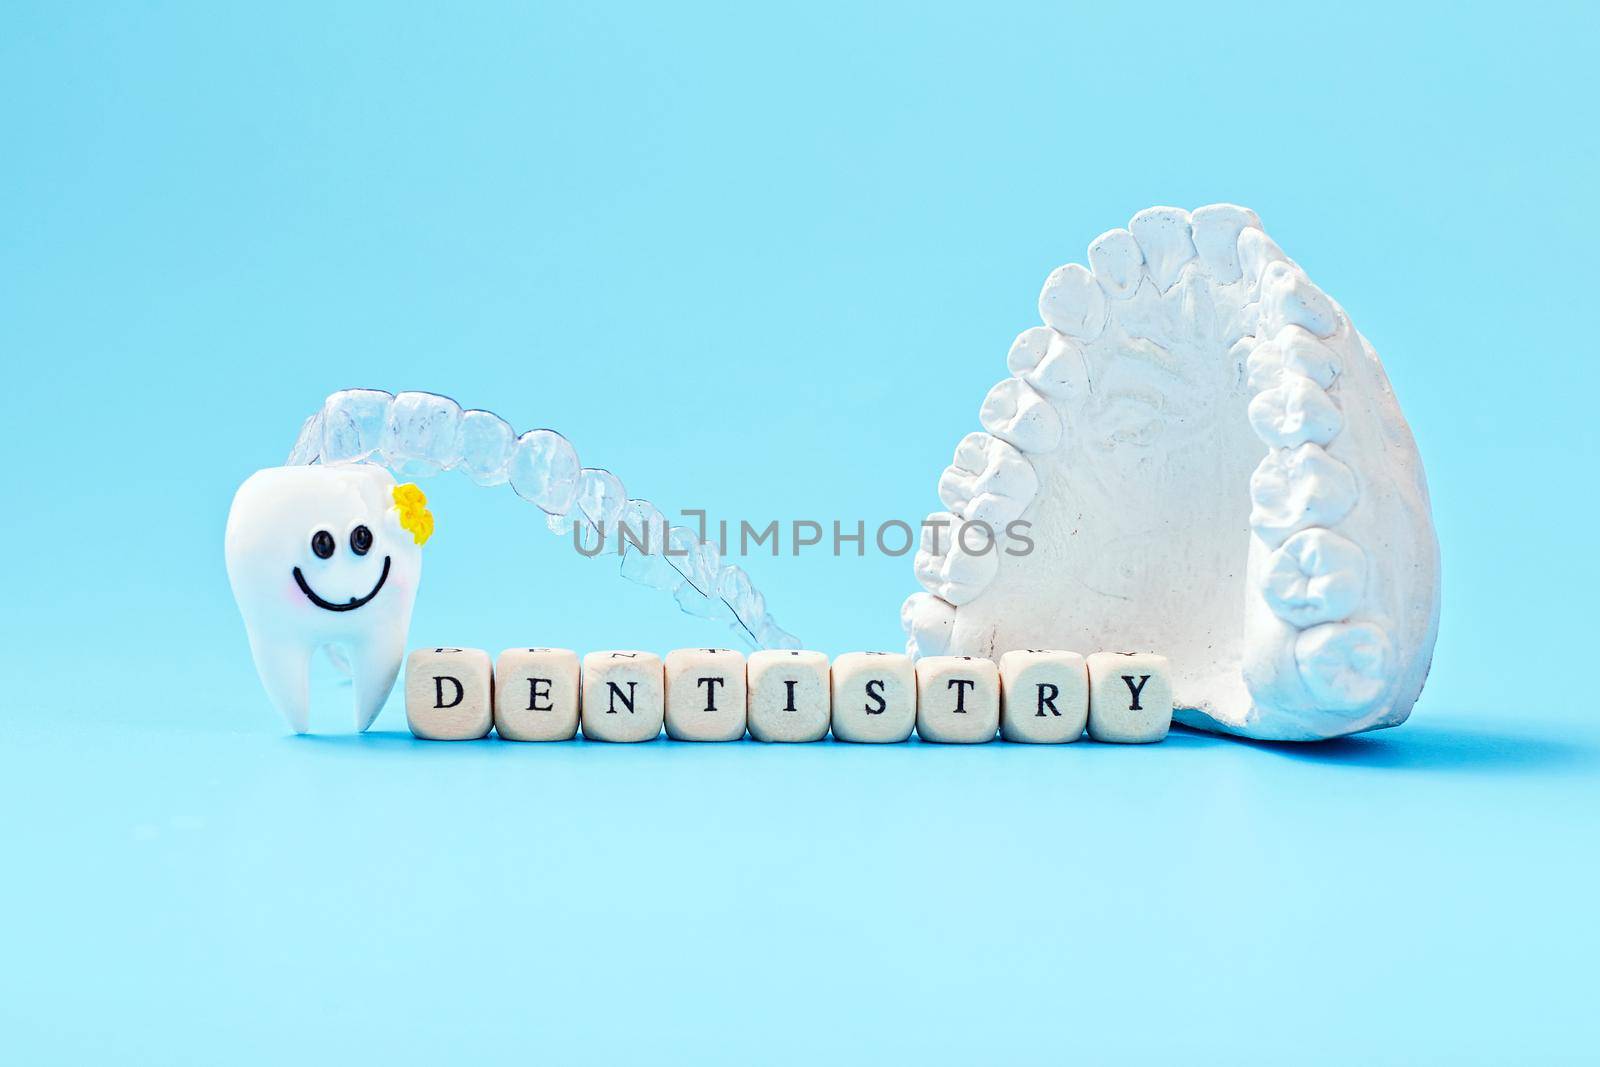 Dentist lettering for your advertisement on a blue background with invisible dental aligners or braces aplicable for an orthodontic dental treatment by Maximusnd